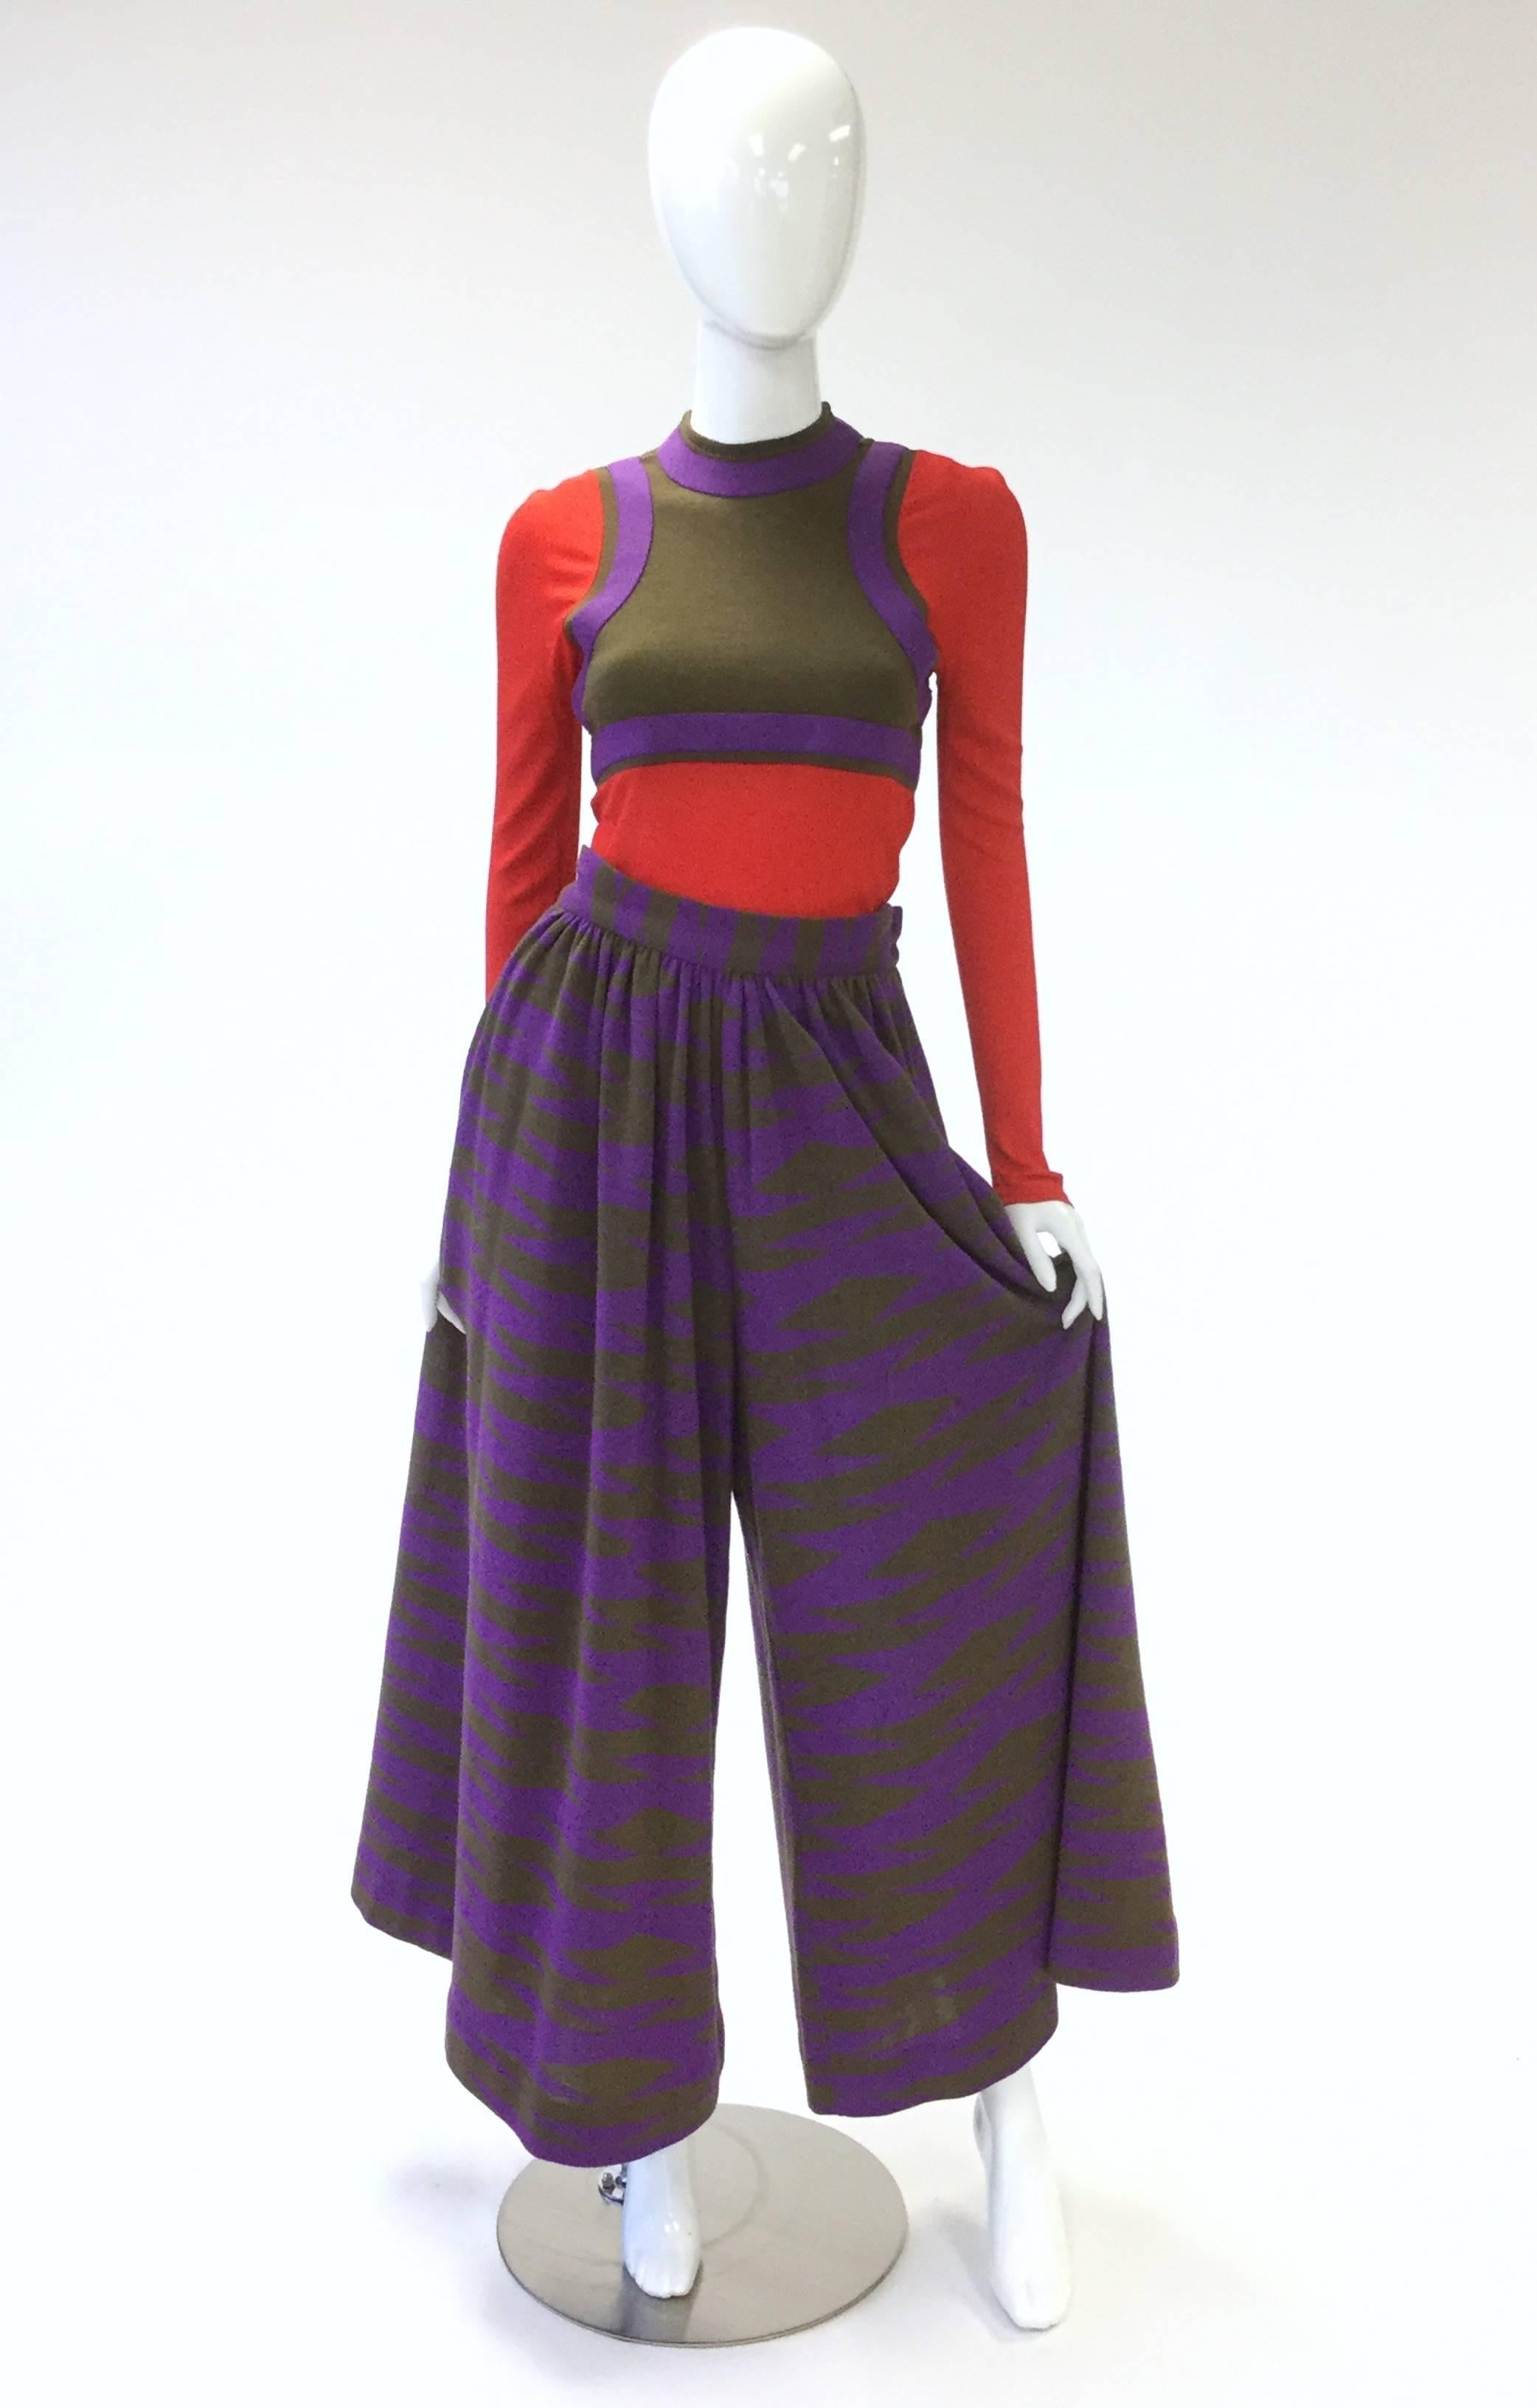 Very striking 1960s Rudy Gernreich for Harmon Knitwear top and culottes set. The top features long, red knit sleeves, red knit stomach panels, and a crew neck, as well as purple and olive wool panels creating the illusion of a layered crop top